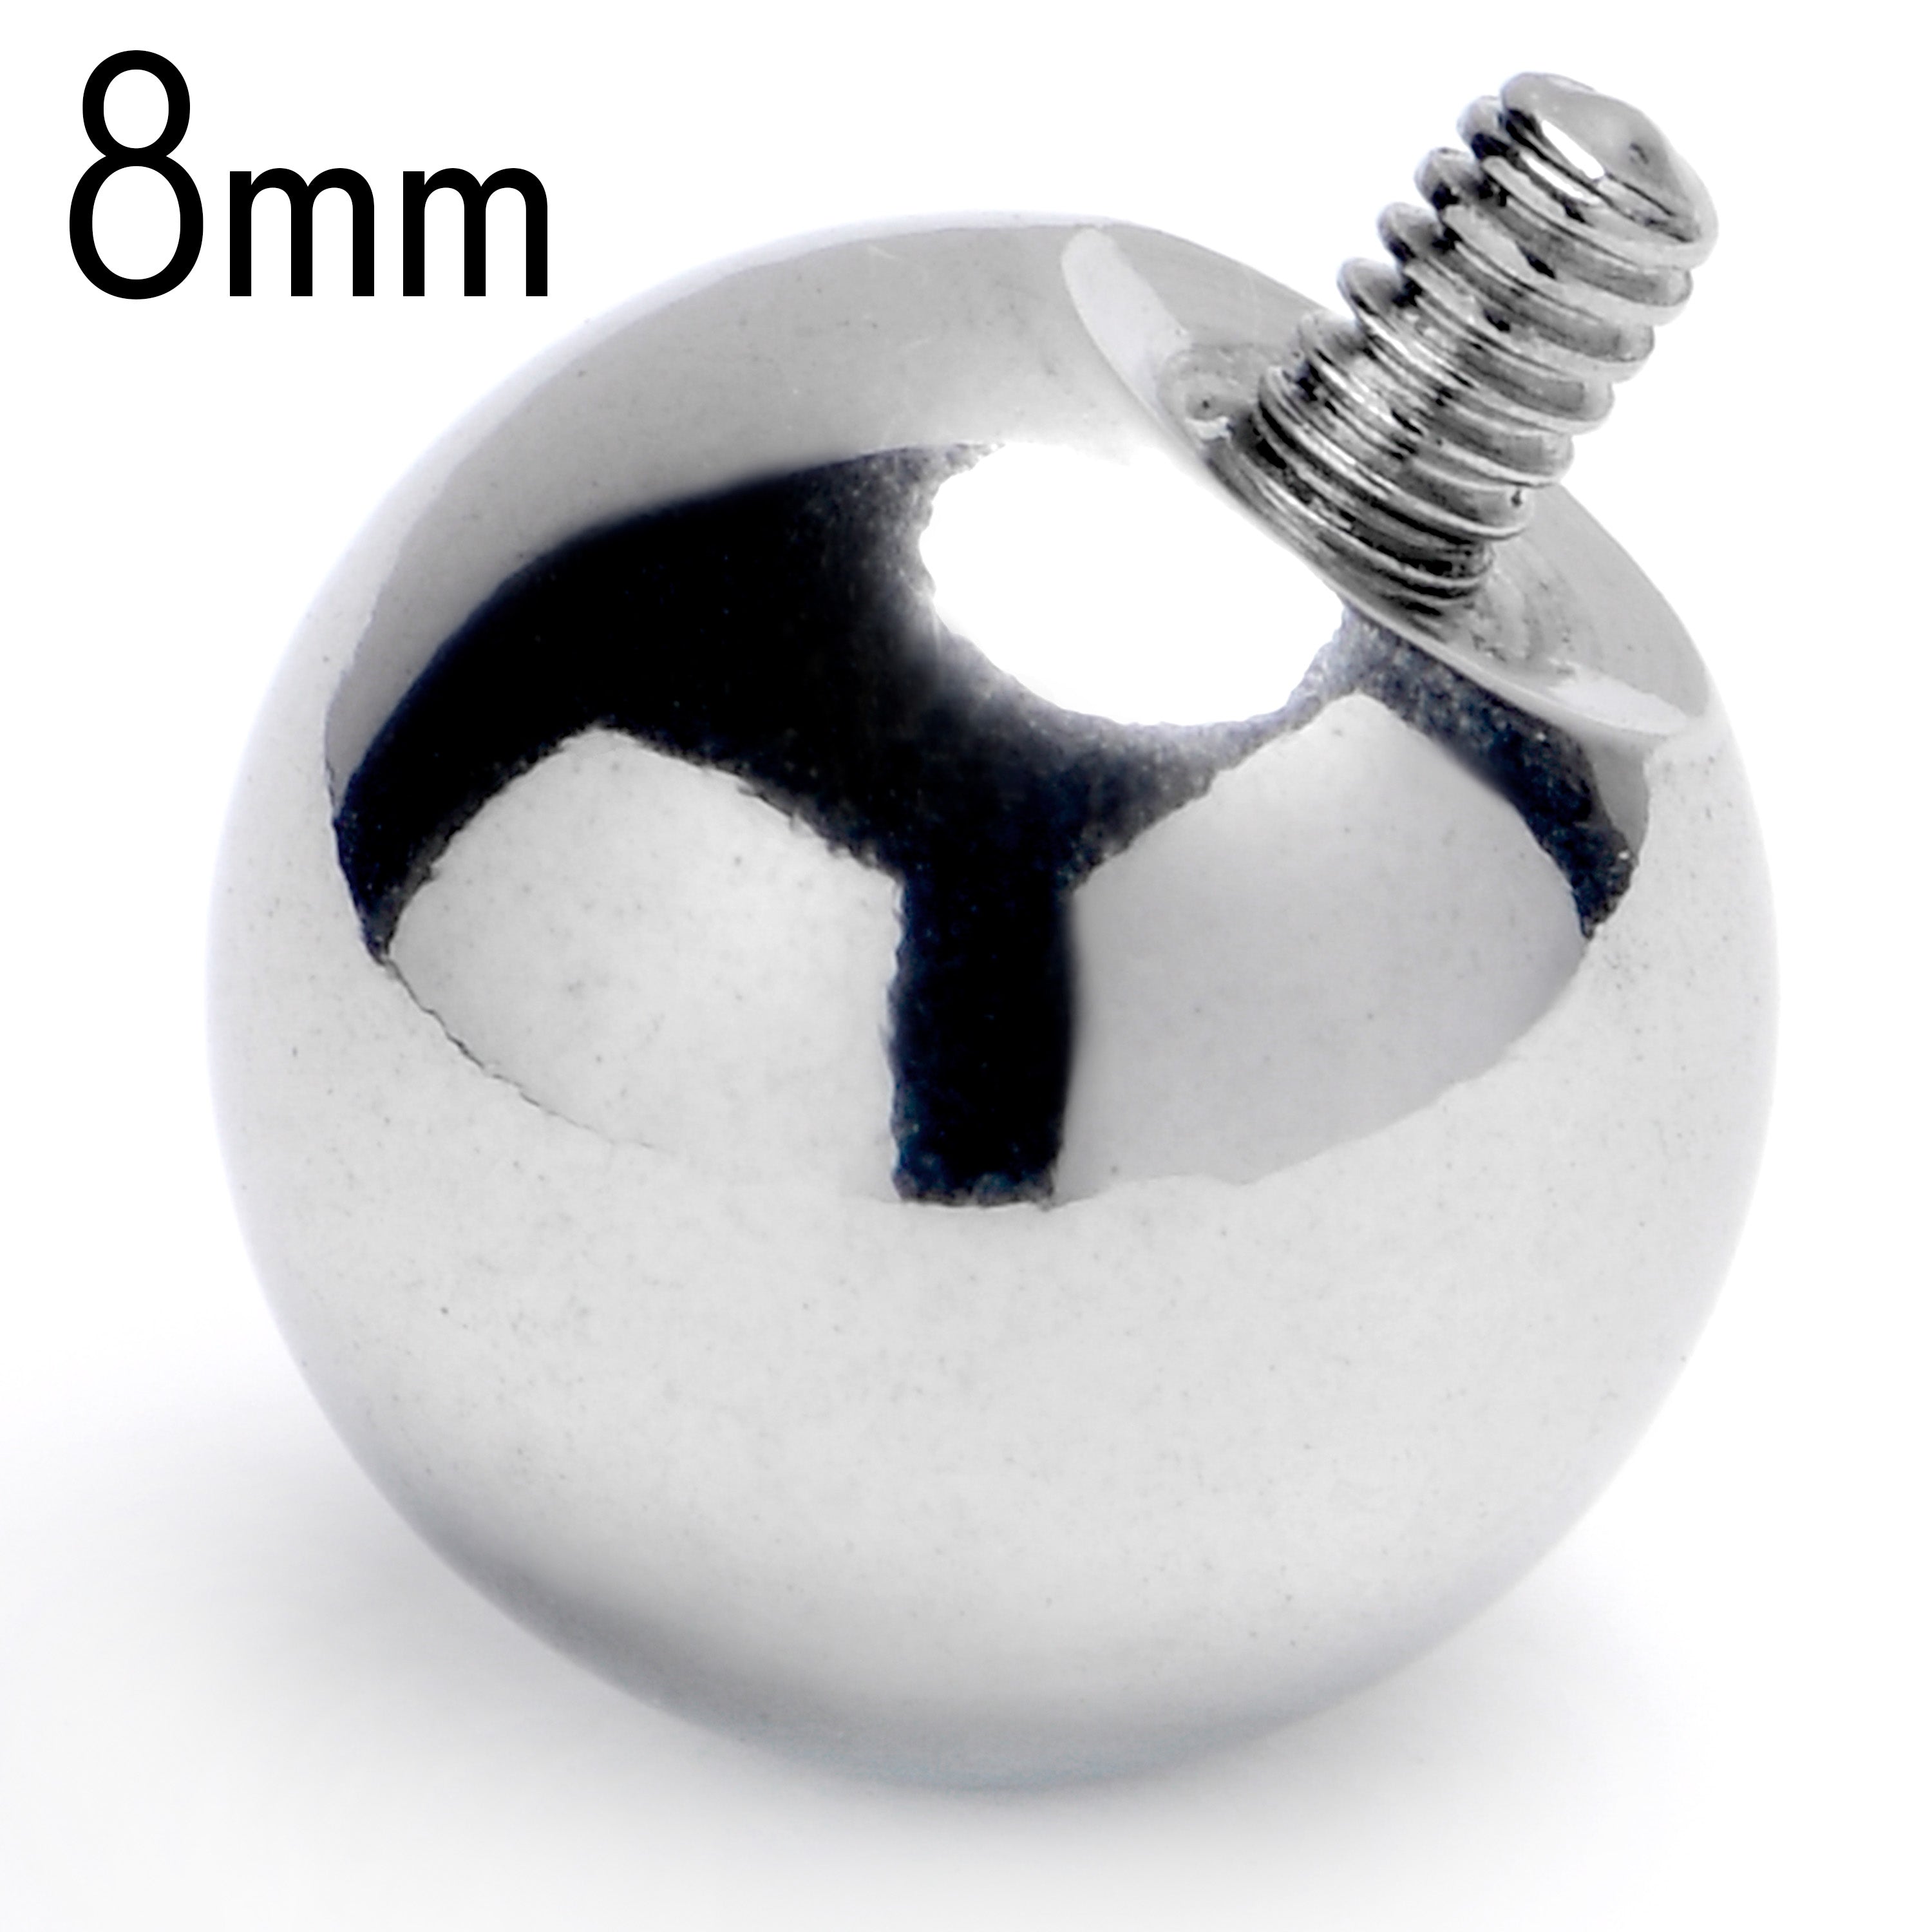 14 Gauge 8mm Replacement Ball End Internally Threaded Jewelry